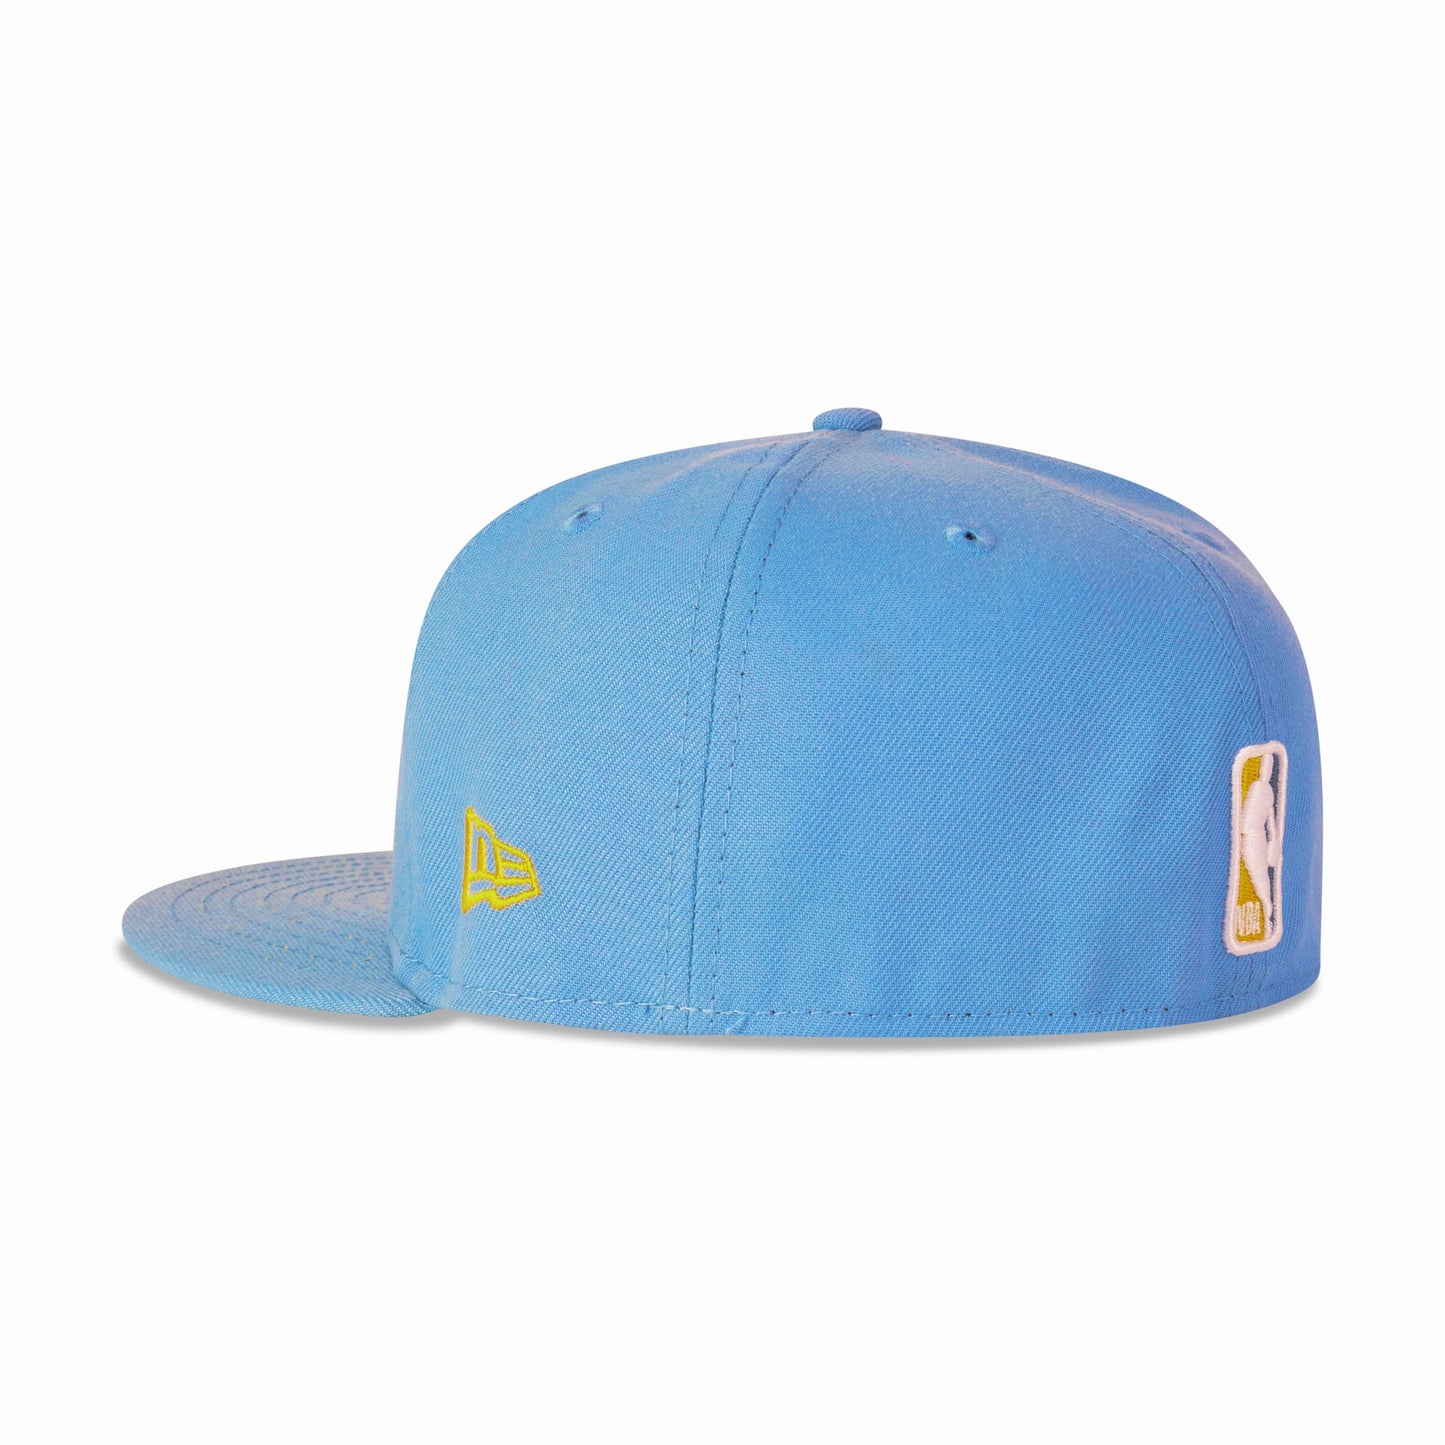 New Era Vancouver Grizzlies Fitted Yellow Bottom "Sky Blue Yellow" (Basketball Embroidery)